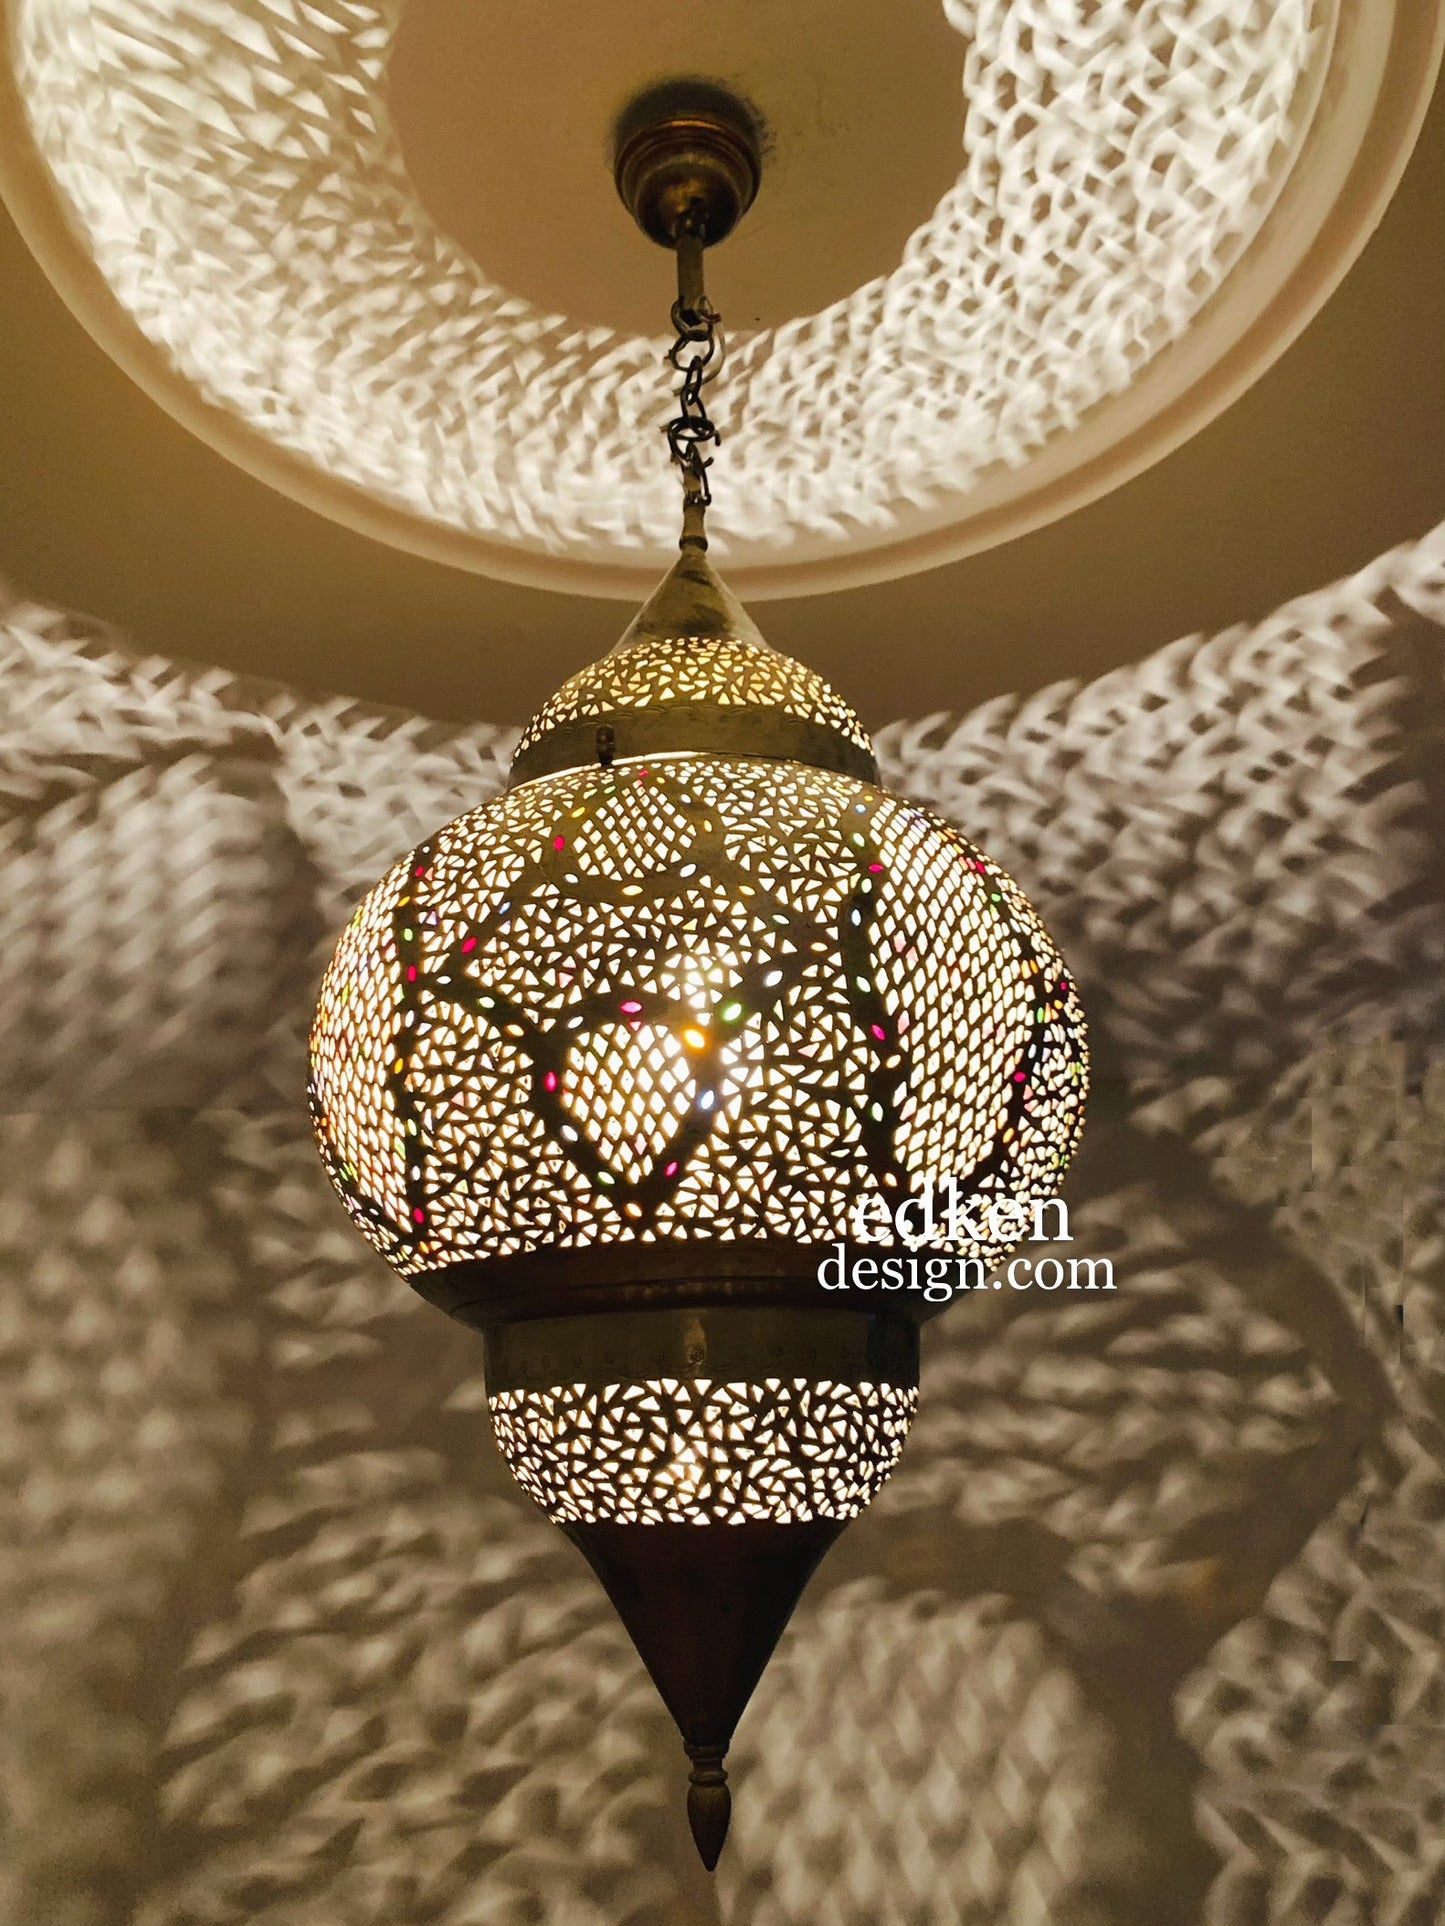 EDKEN LIGHTS - Closer view Morocco Ceiling Lamp Shades Fixture brass Morocco Chandelier